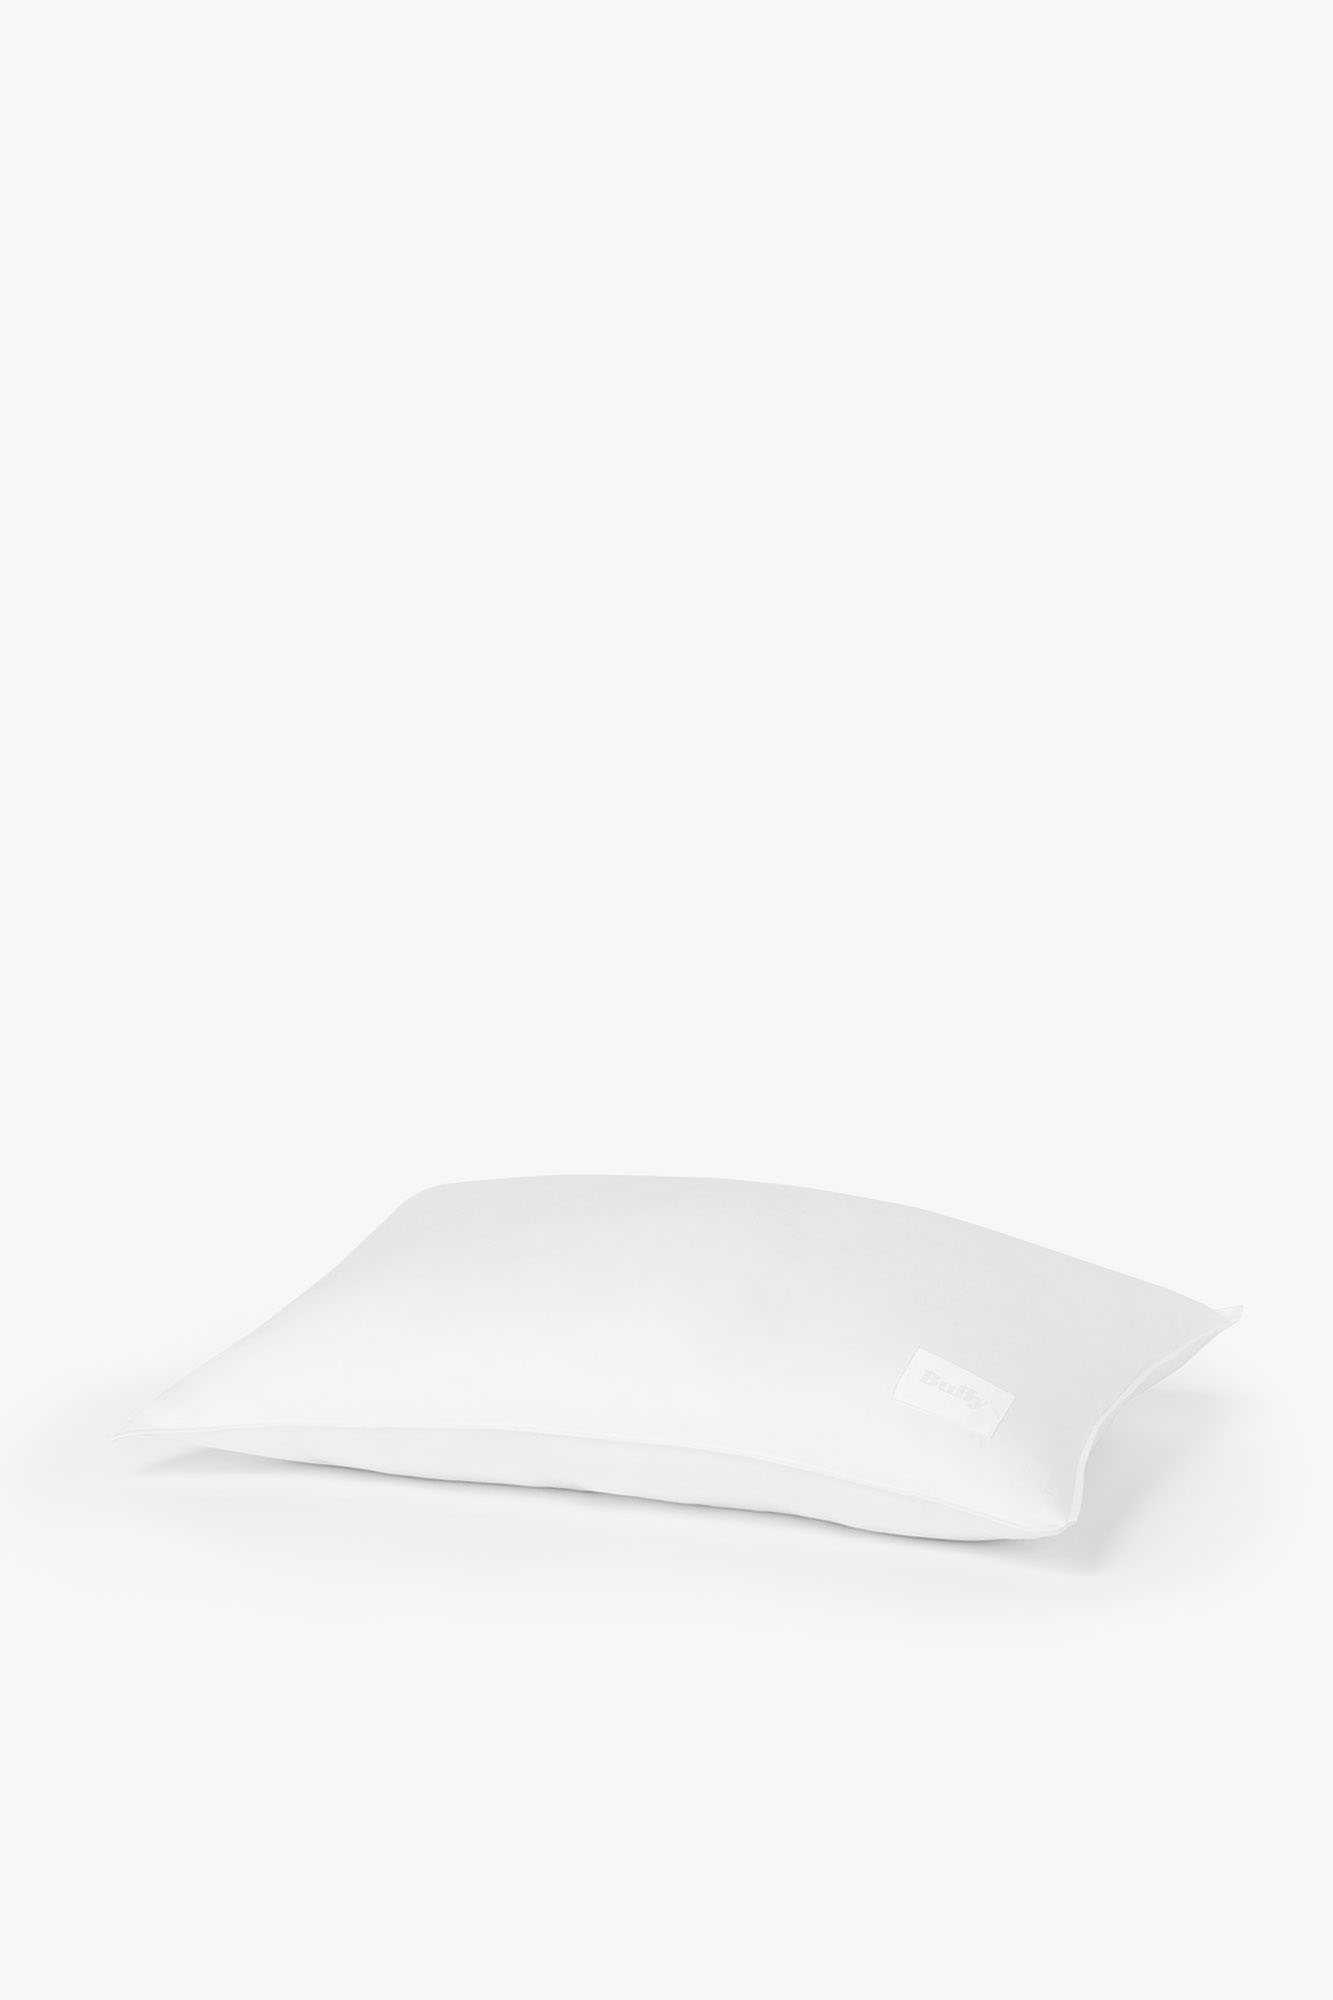 Product shot of a white pillow against a white background.